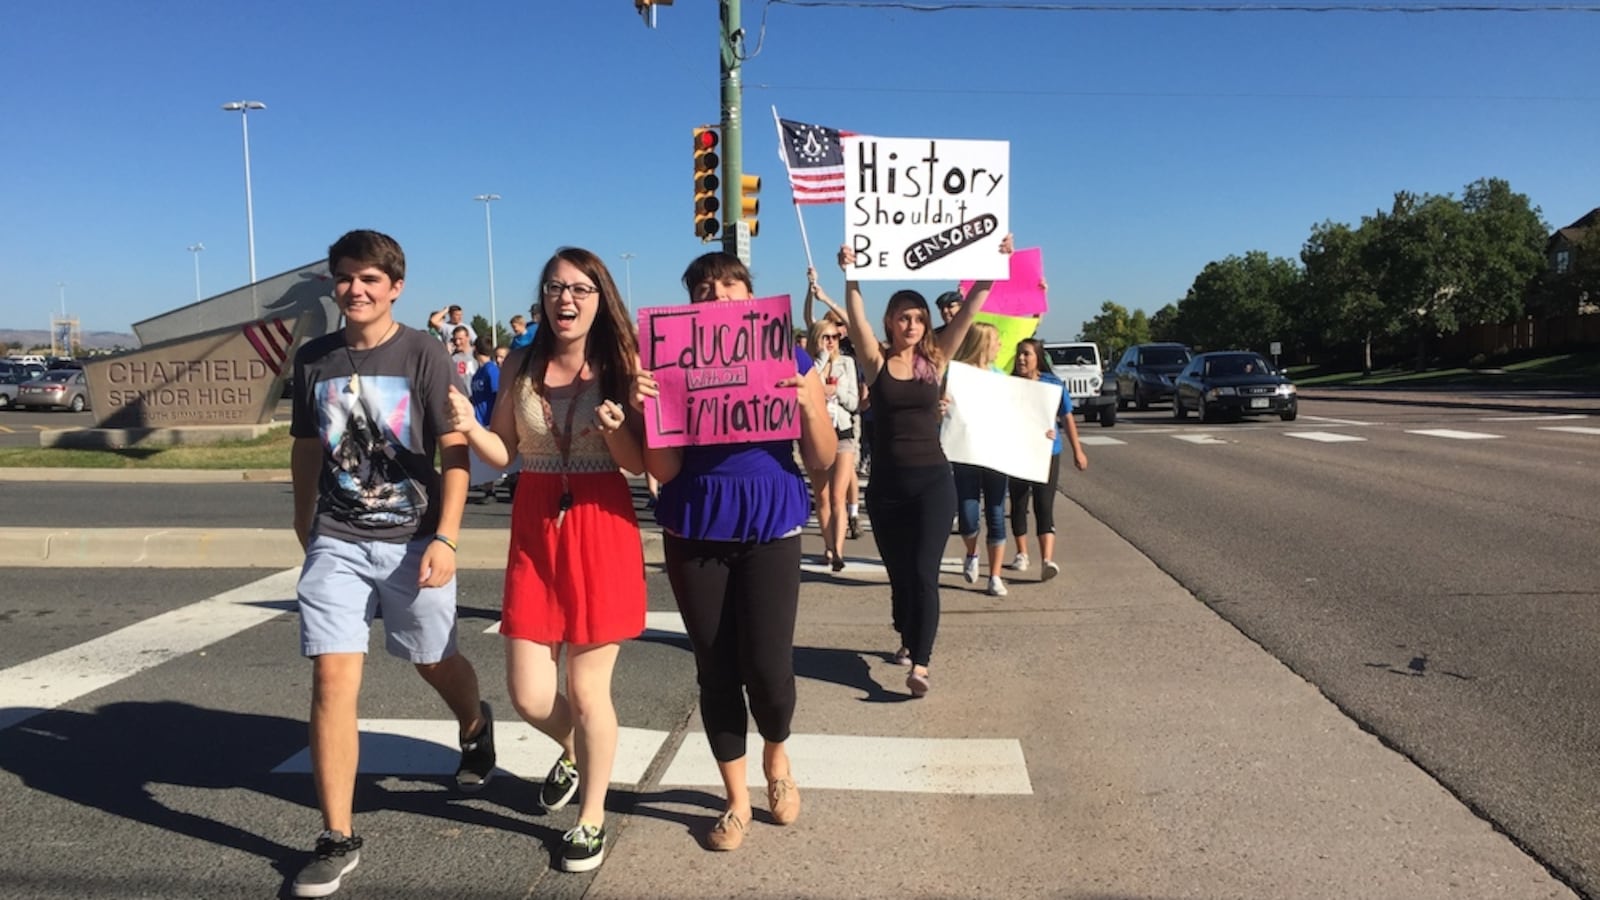 Students at Chatfield High School Wednesday morning walked out of class to protest a proposed curriculum review committee they believe could lead to censorship.